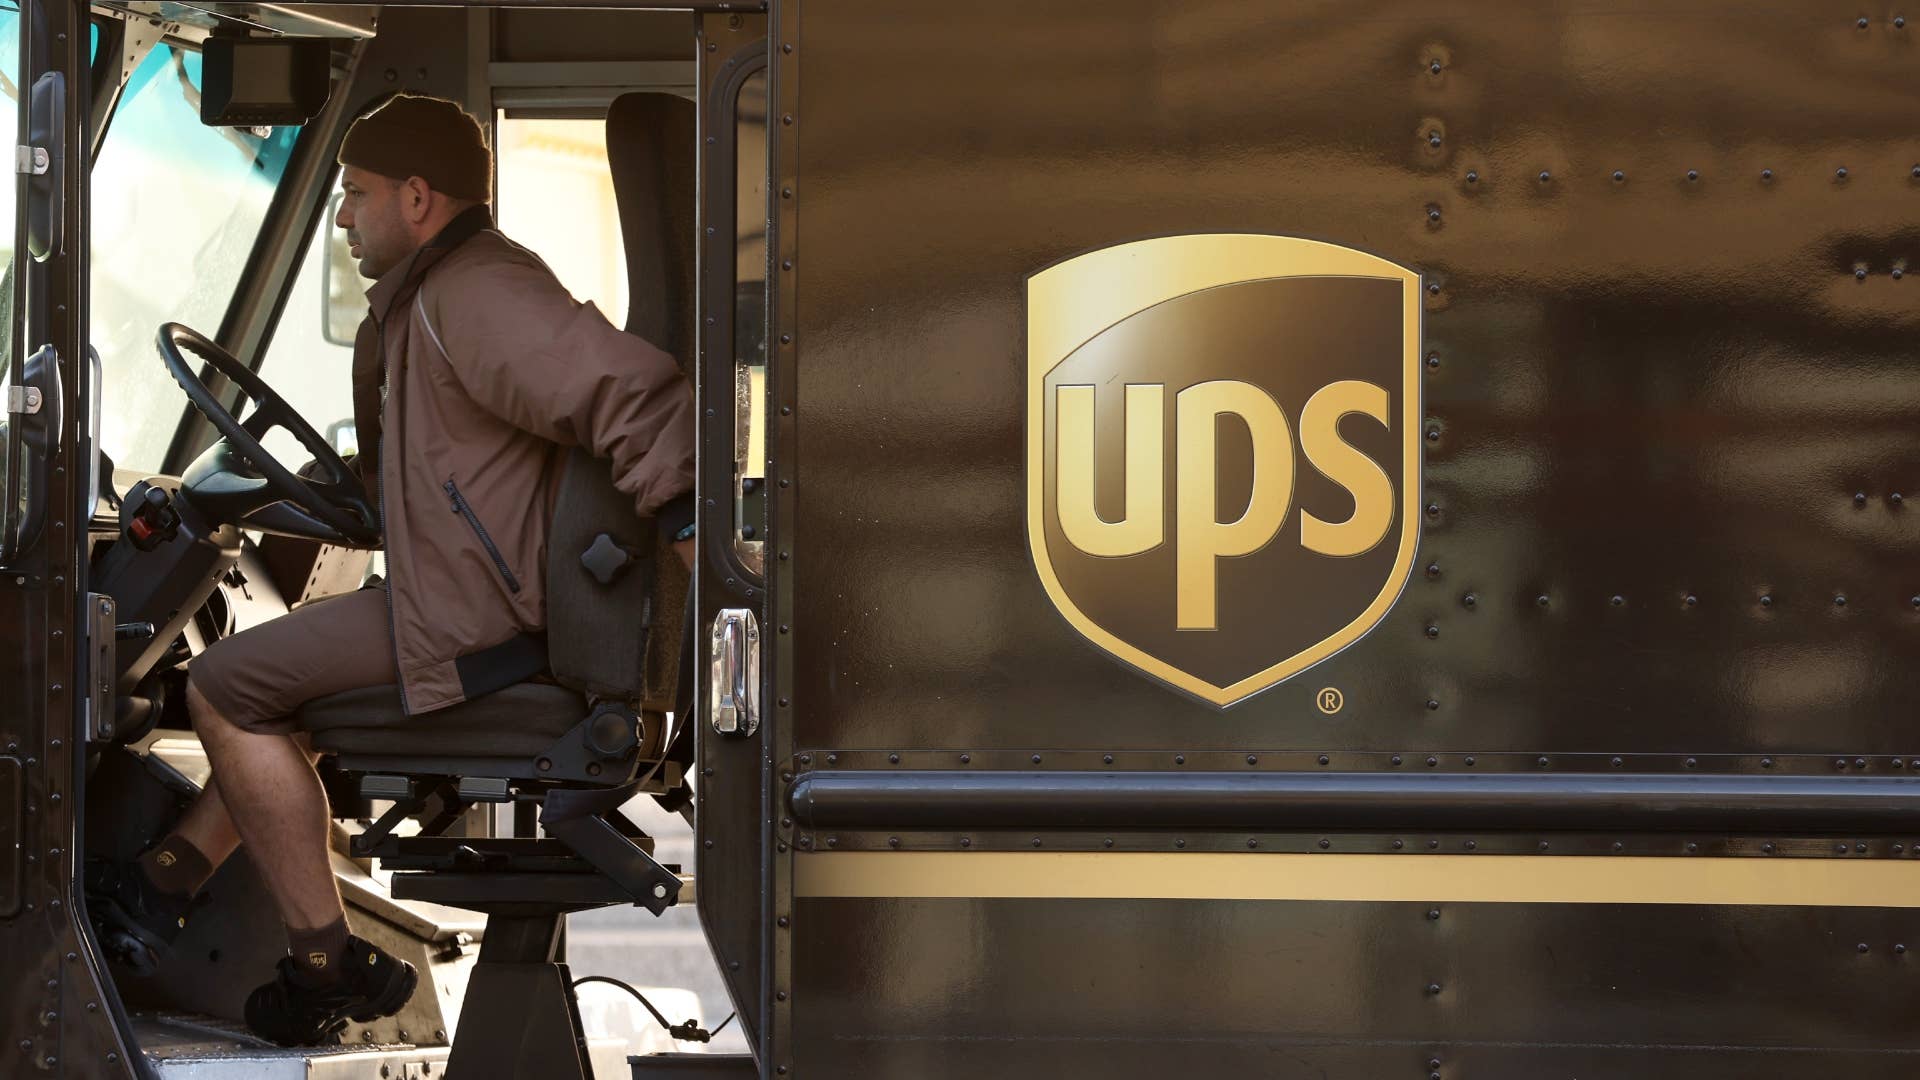 UPS Workers Among Those Arrested After Allegedly Moving Cocaine Through Packages